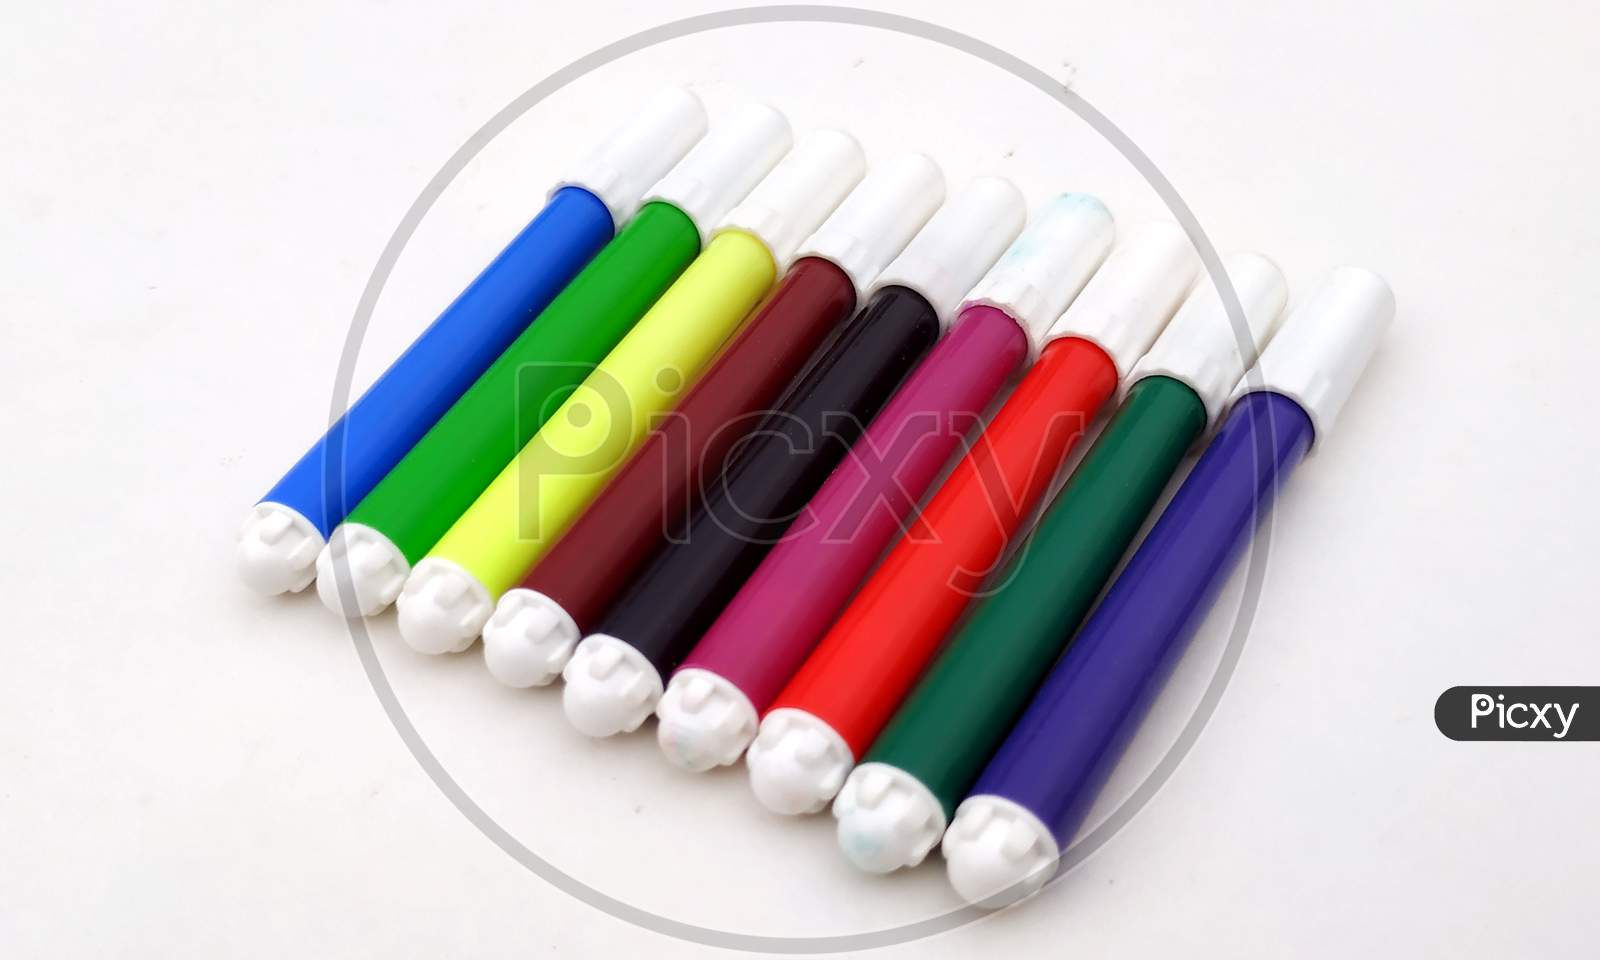 Markers pen. Set of varioust color markers. Watercolor pen. Tool for designer